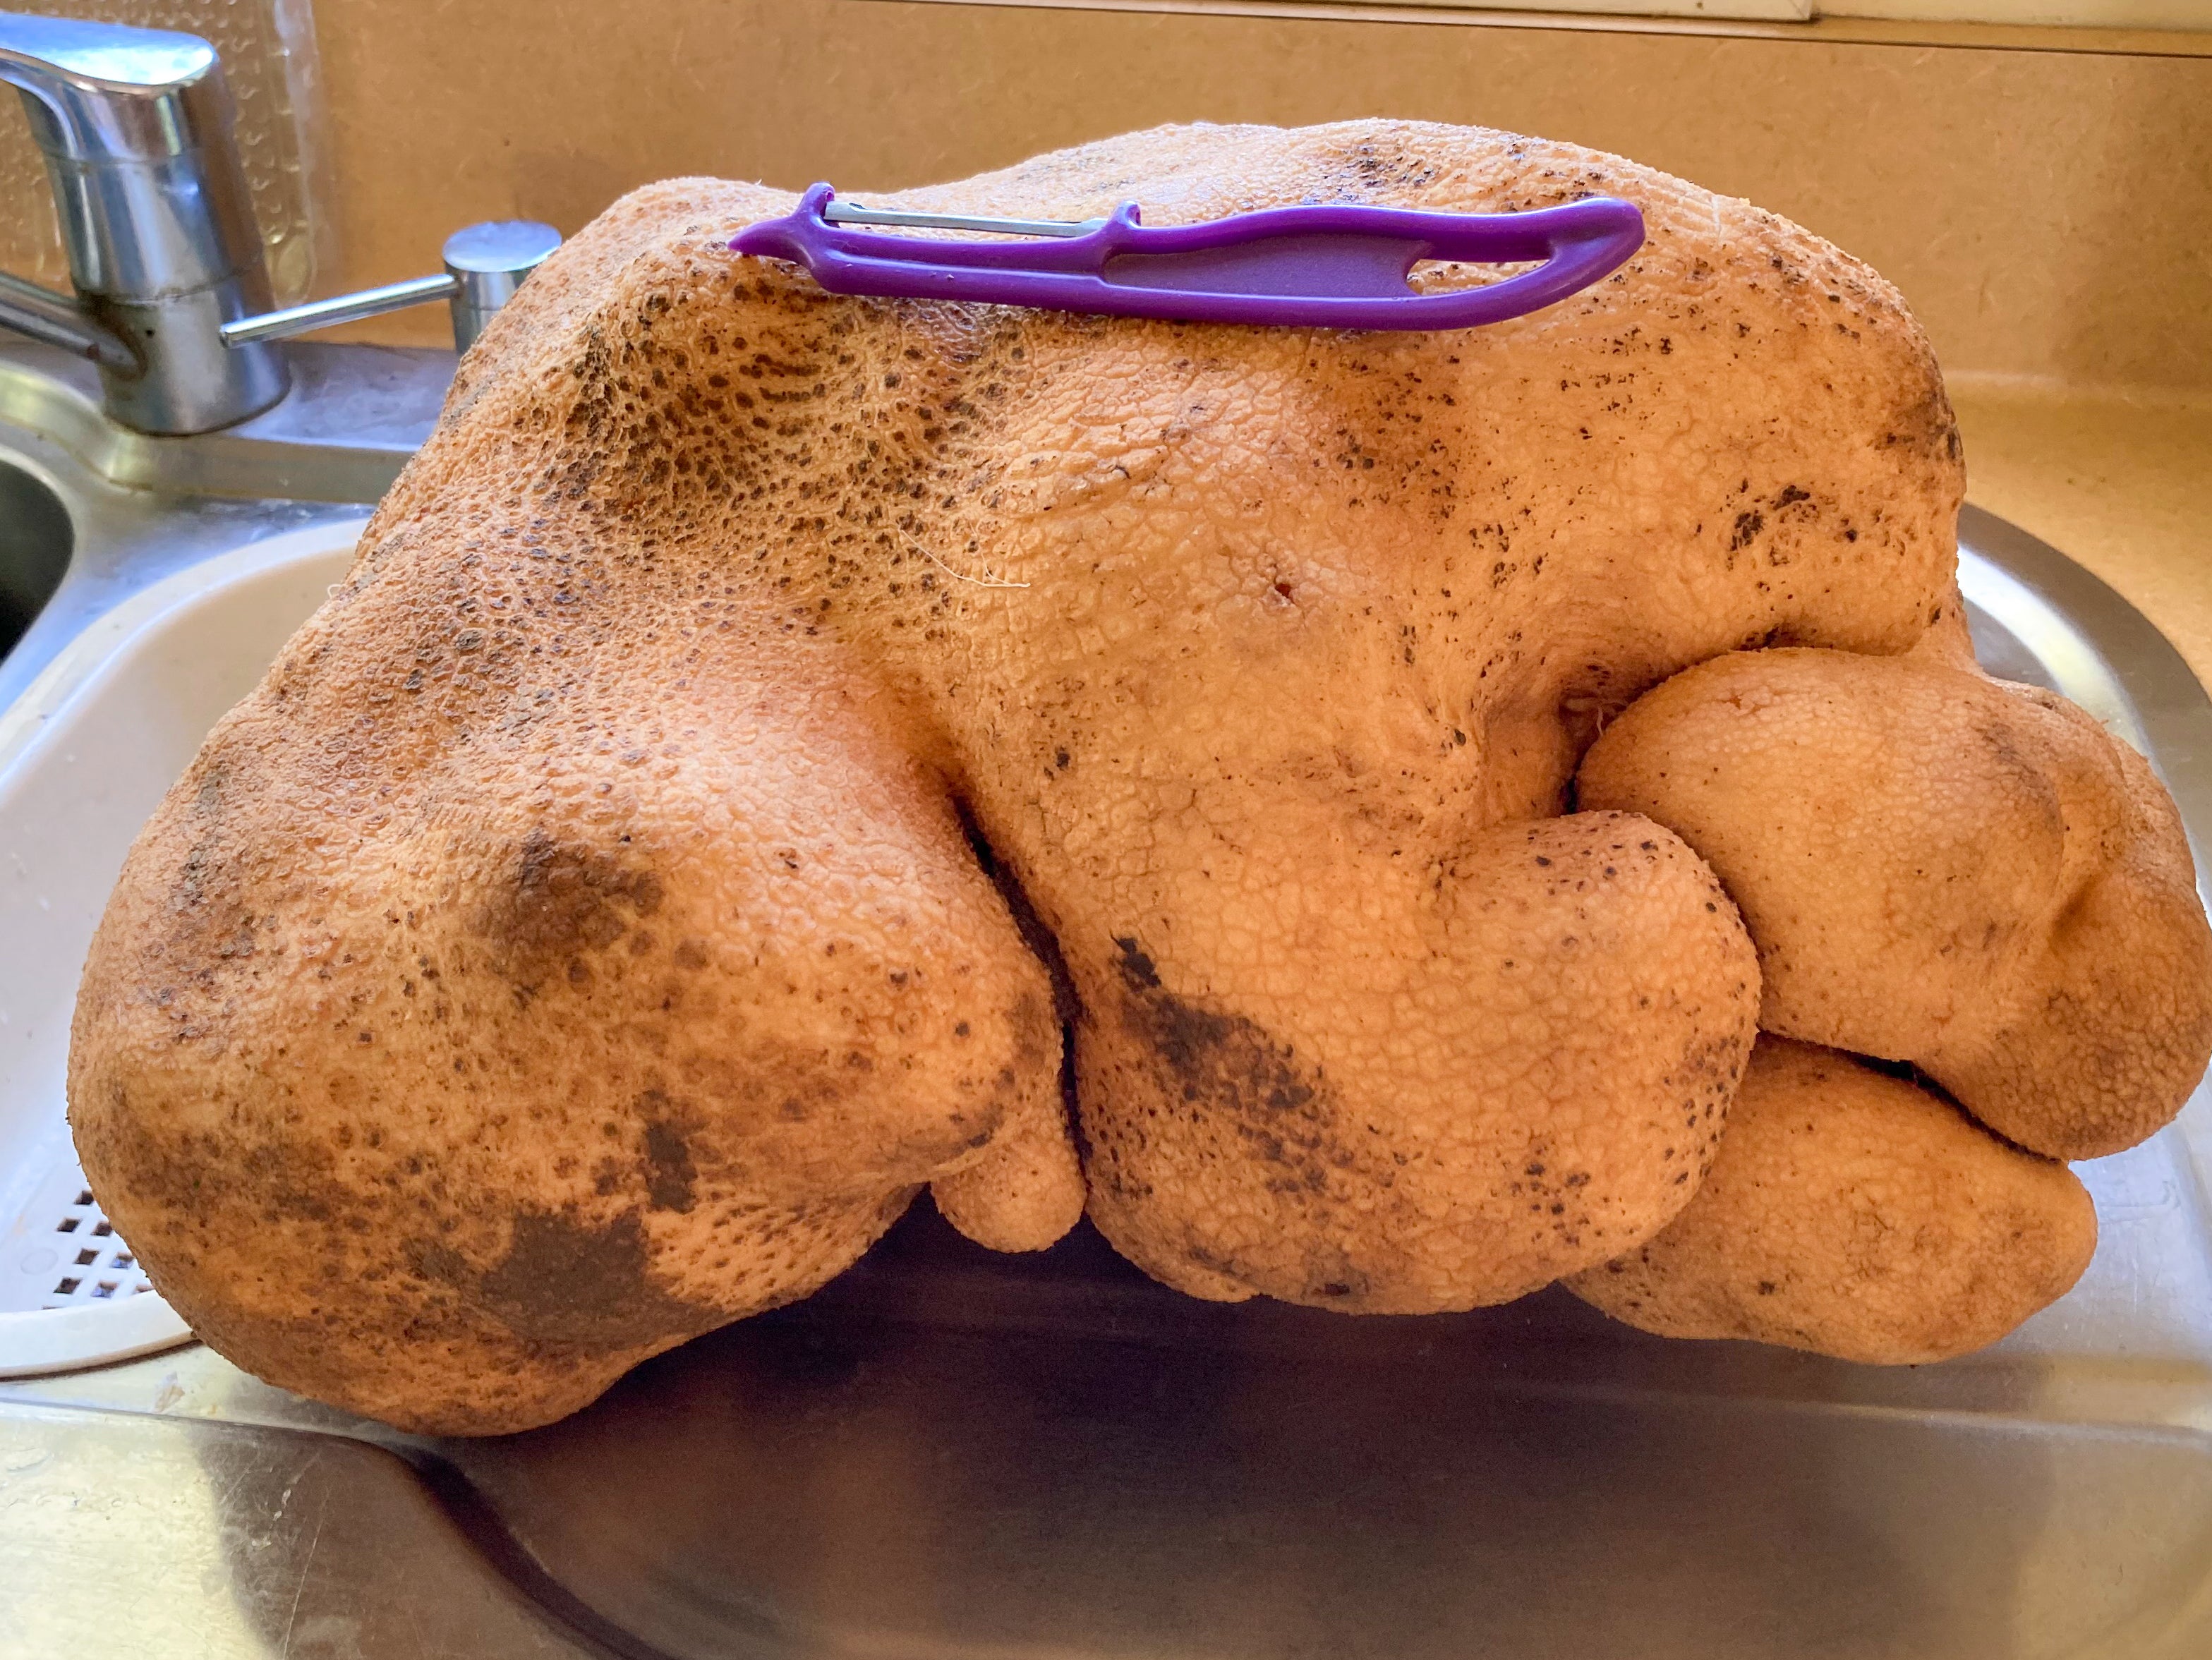 ‘Dug’ is not the world’s largest potato